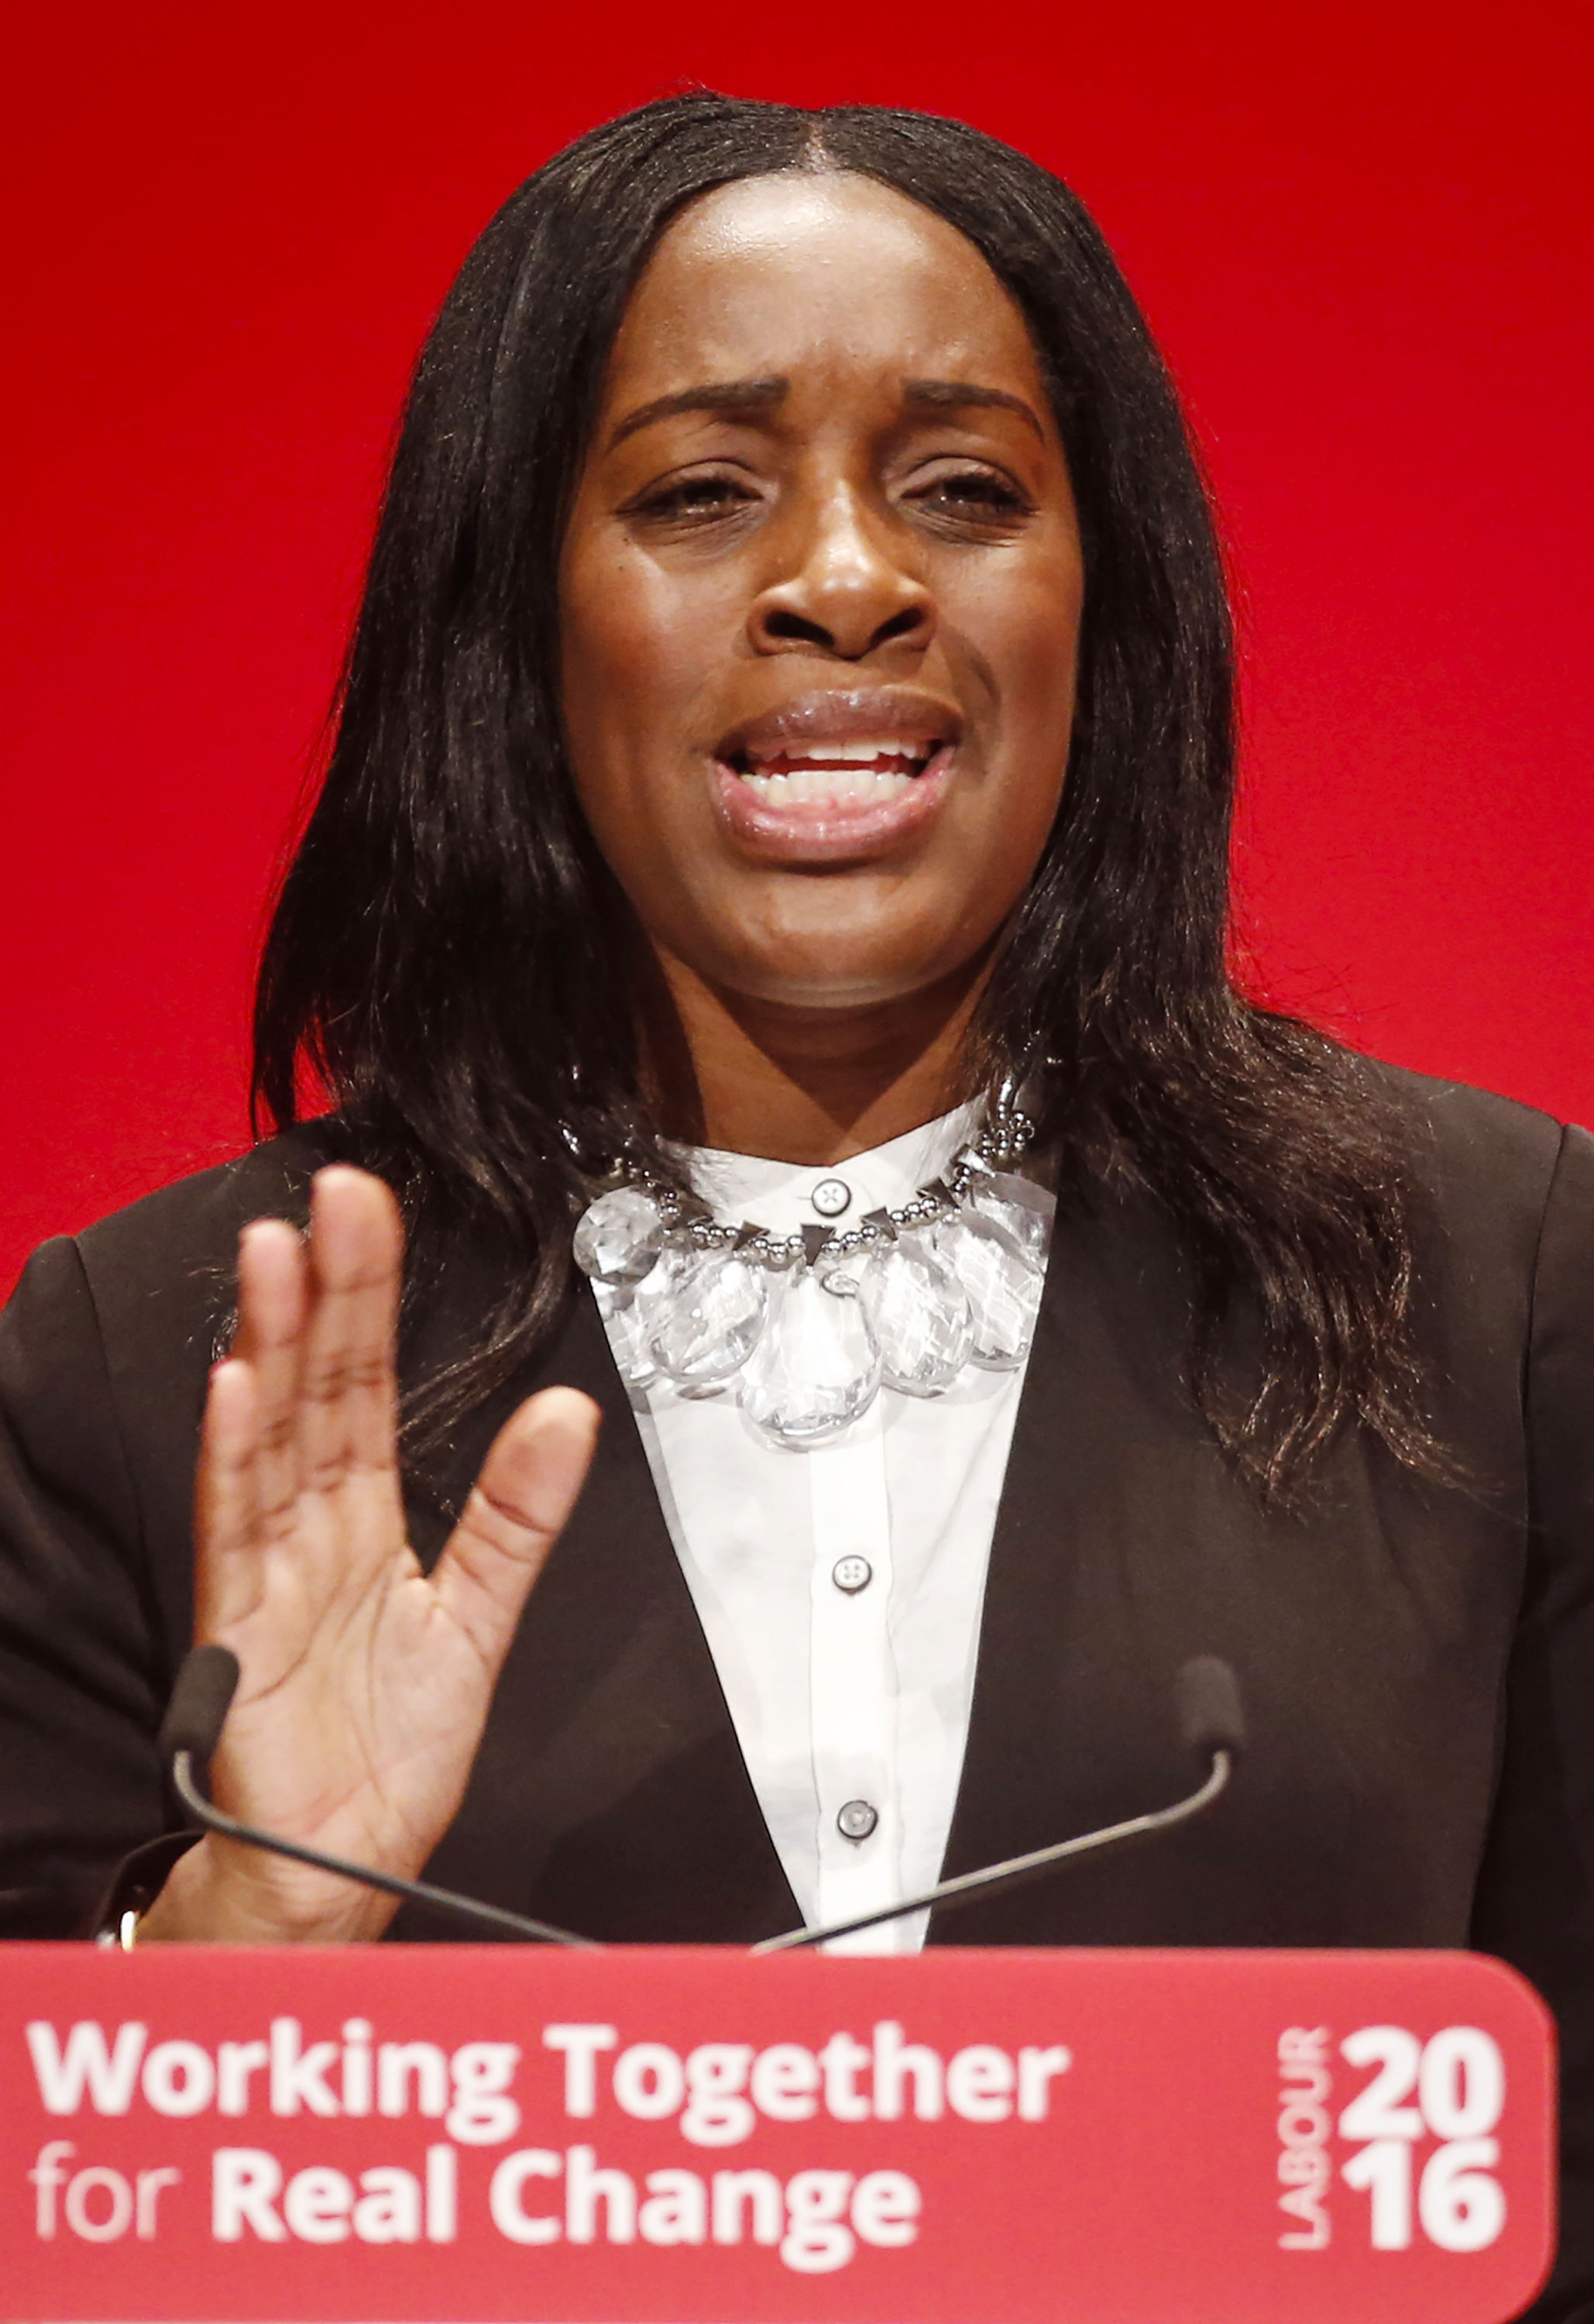 Labour's Kate Osamor has been suspended for suggesting Israel’s action in Gaza was genocide